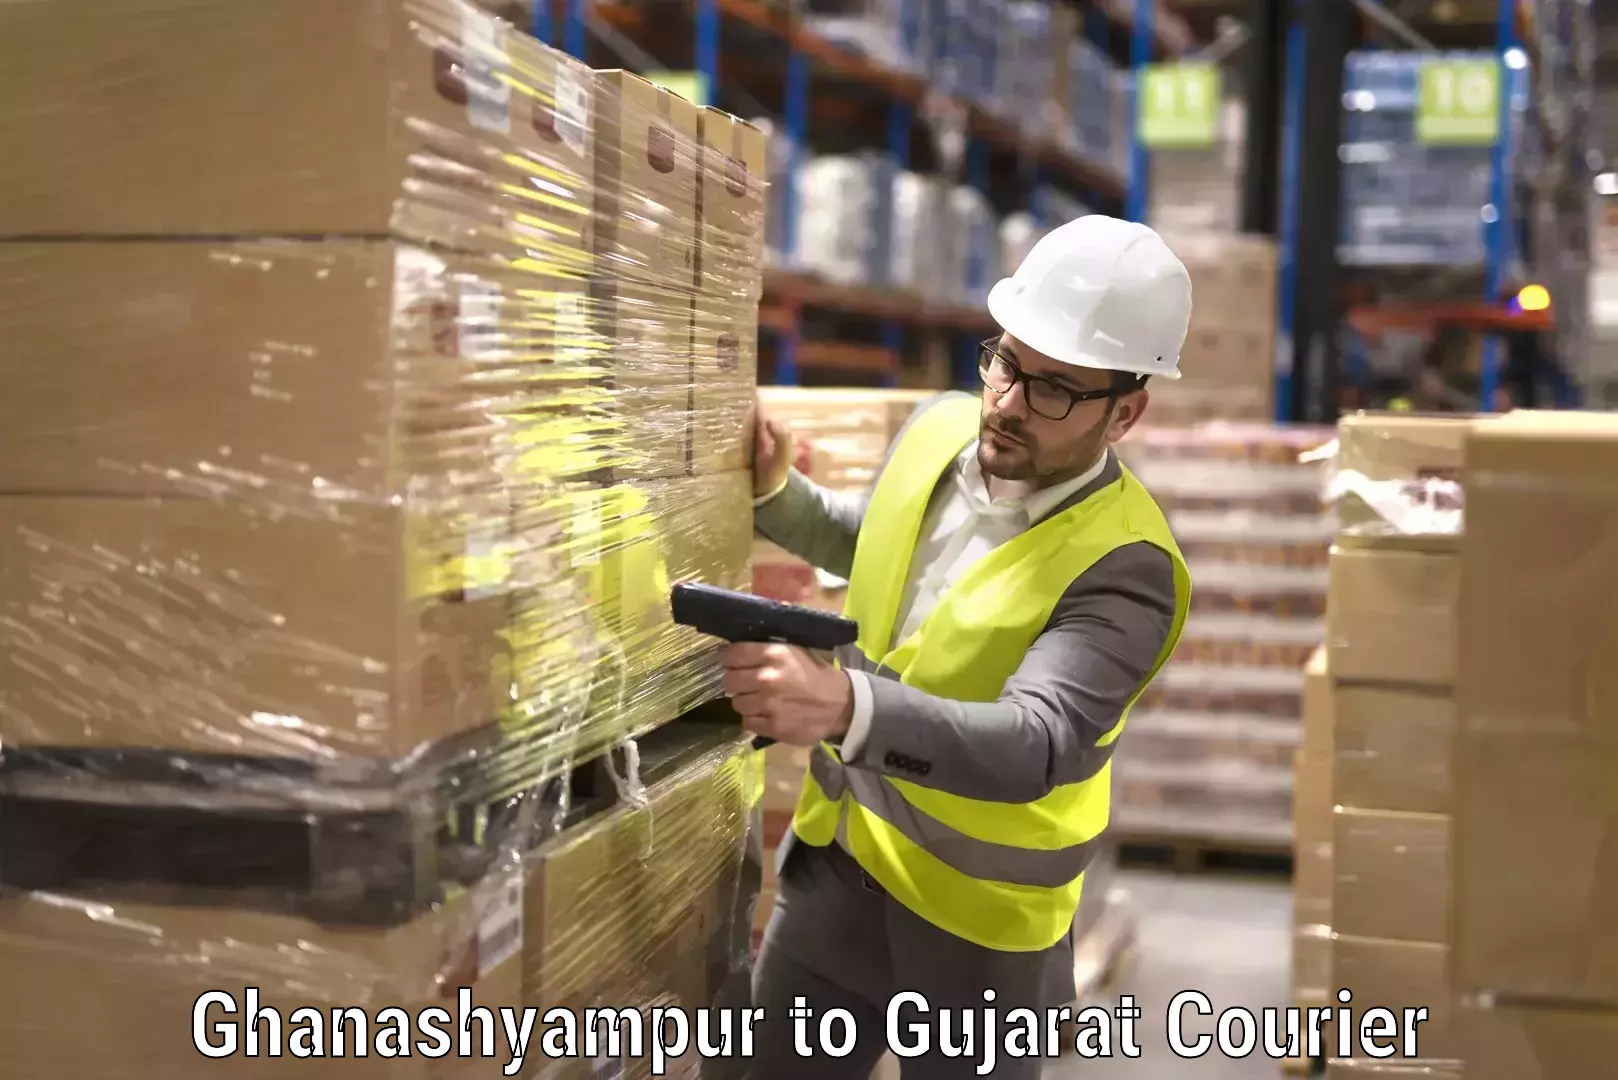 Full-service movers in Ghanashyampur to Gujarat